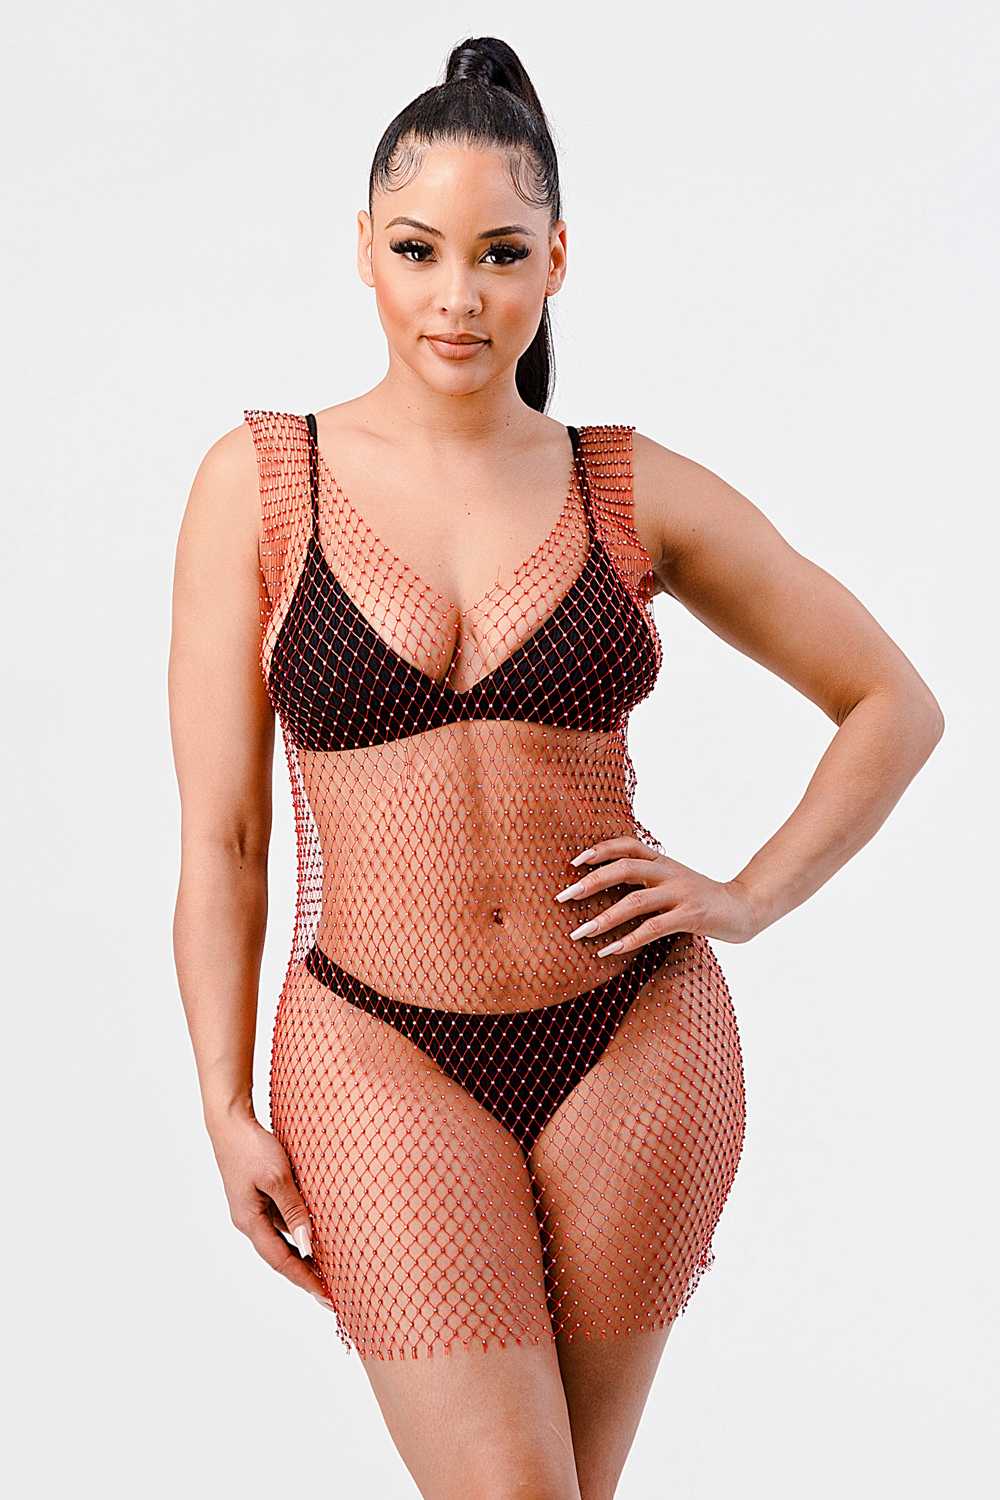 Crystal Beads and Fishnet Seamless Stretch Short Dress